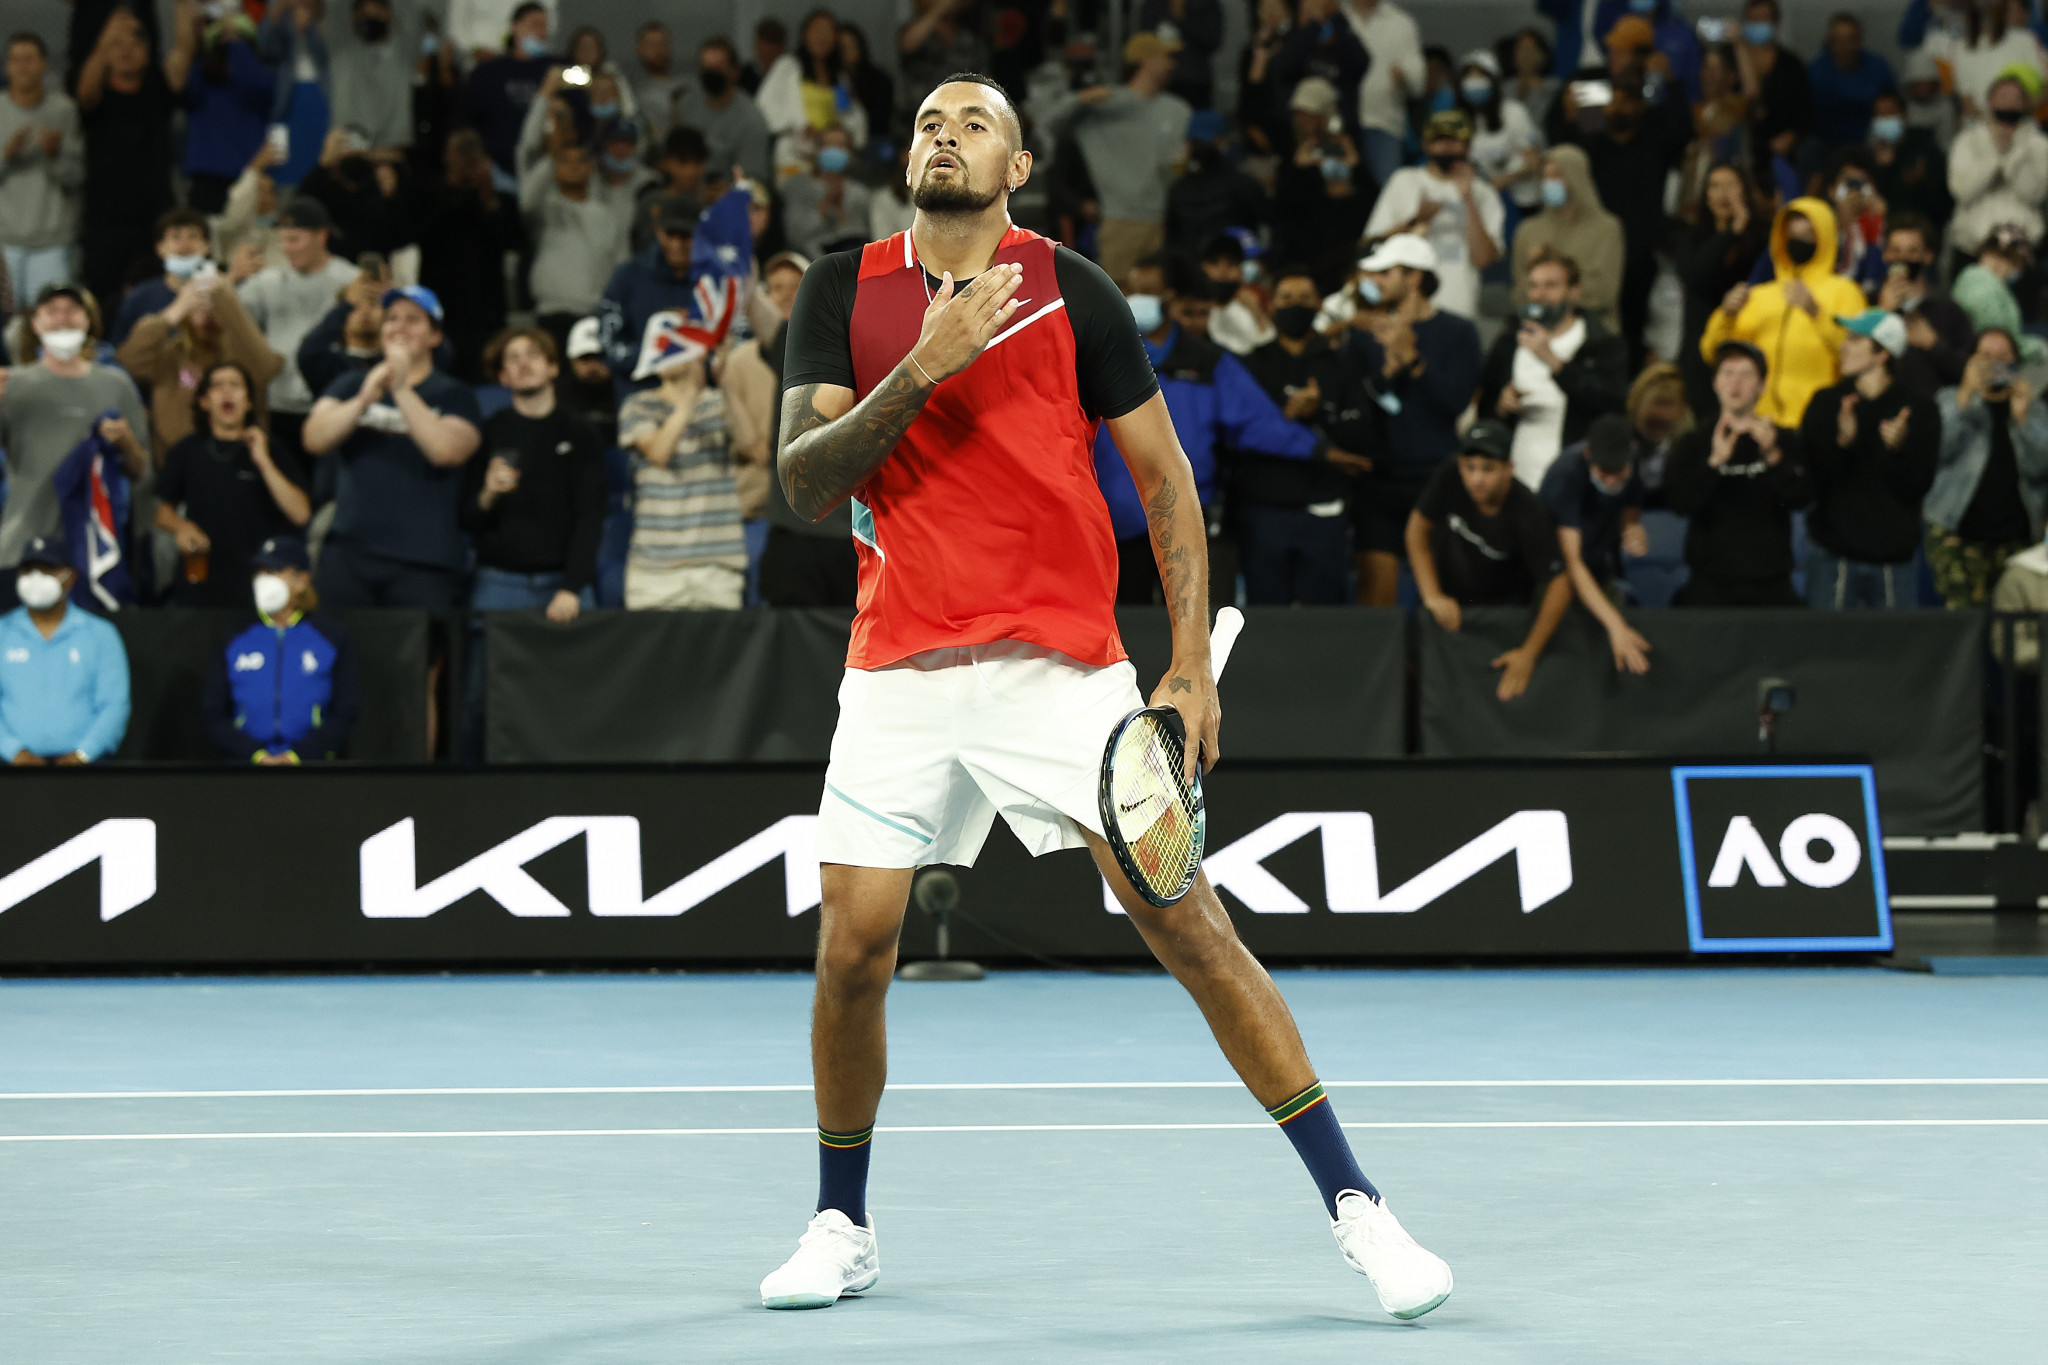 Home favourite Nick Kyrgios soaked up the applause after seeing off Britain's Liam Broady in the opening round ©Getty Images